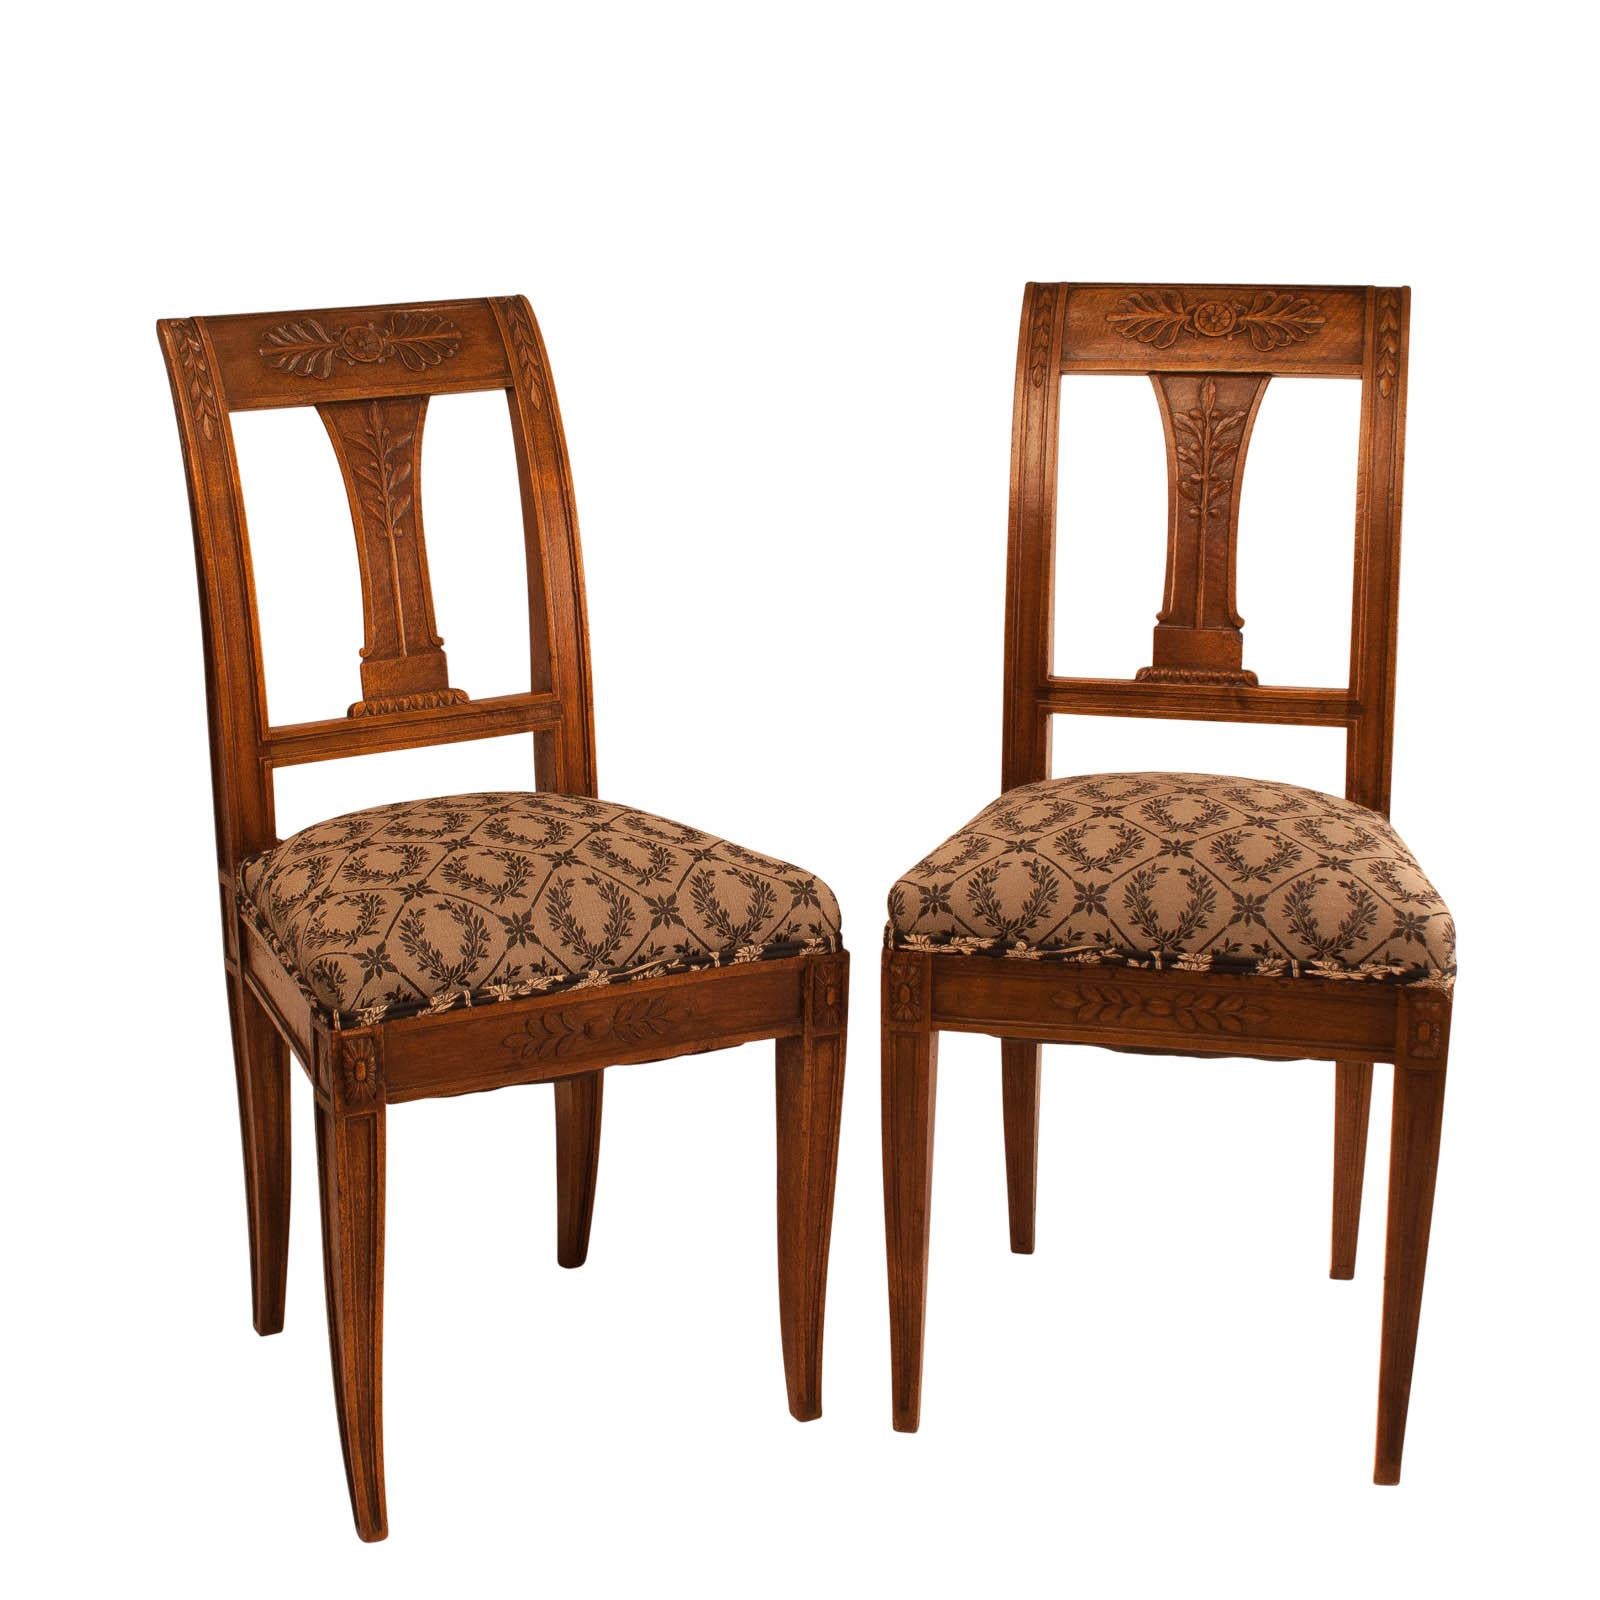 Pair of Neoclassical Style Side Chairs, France, circa 1880